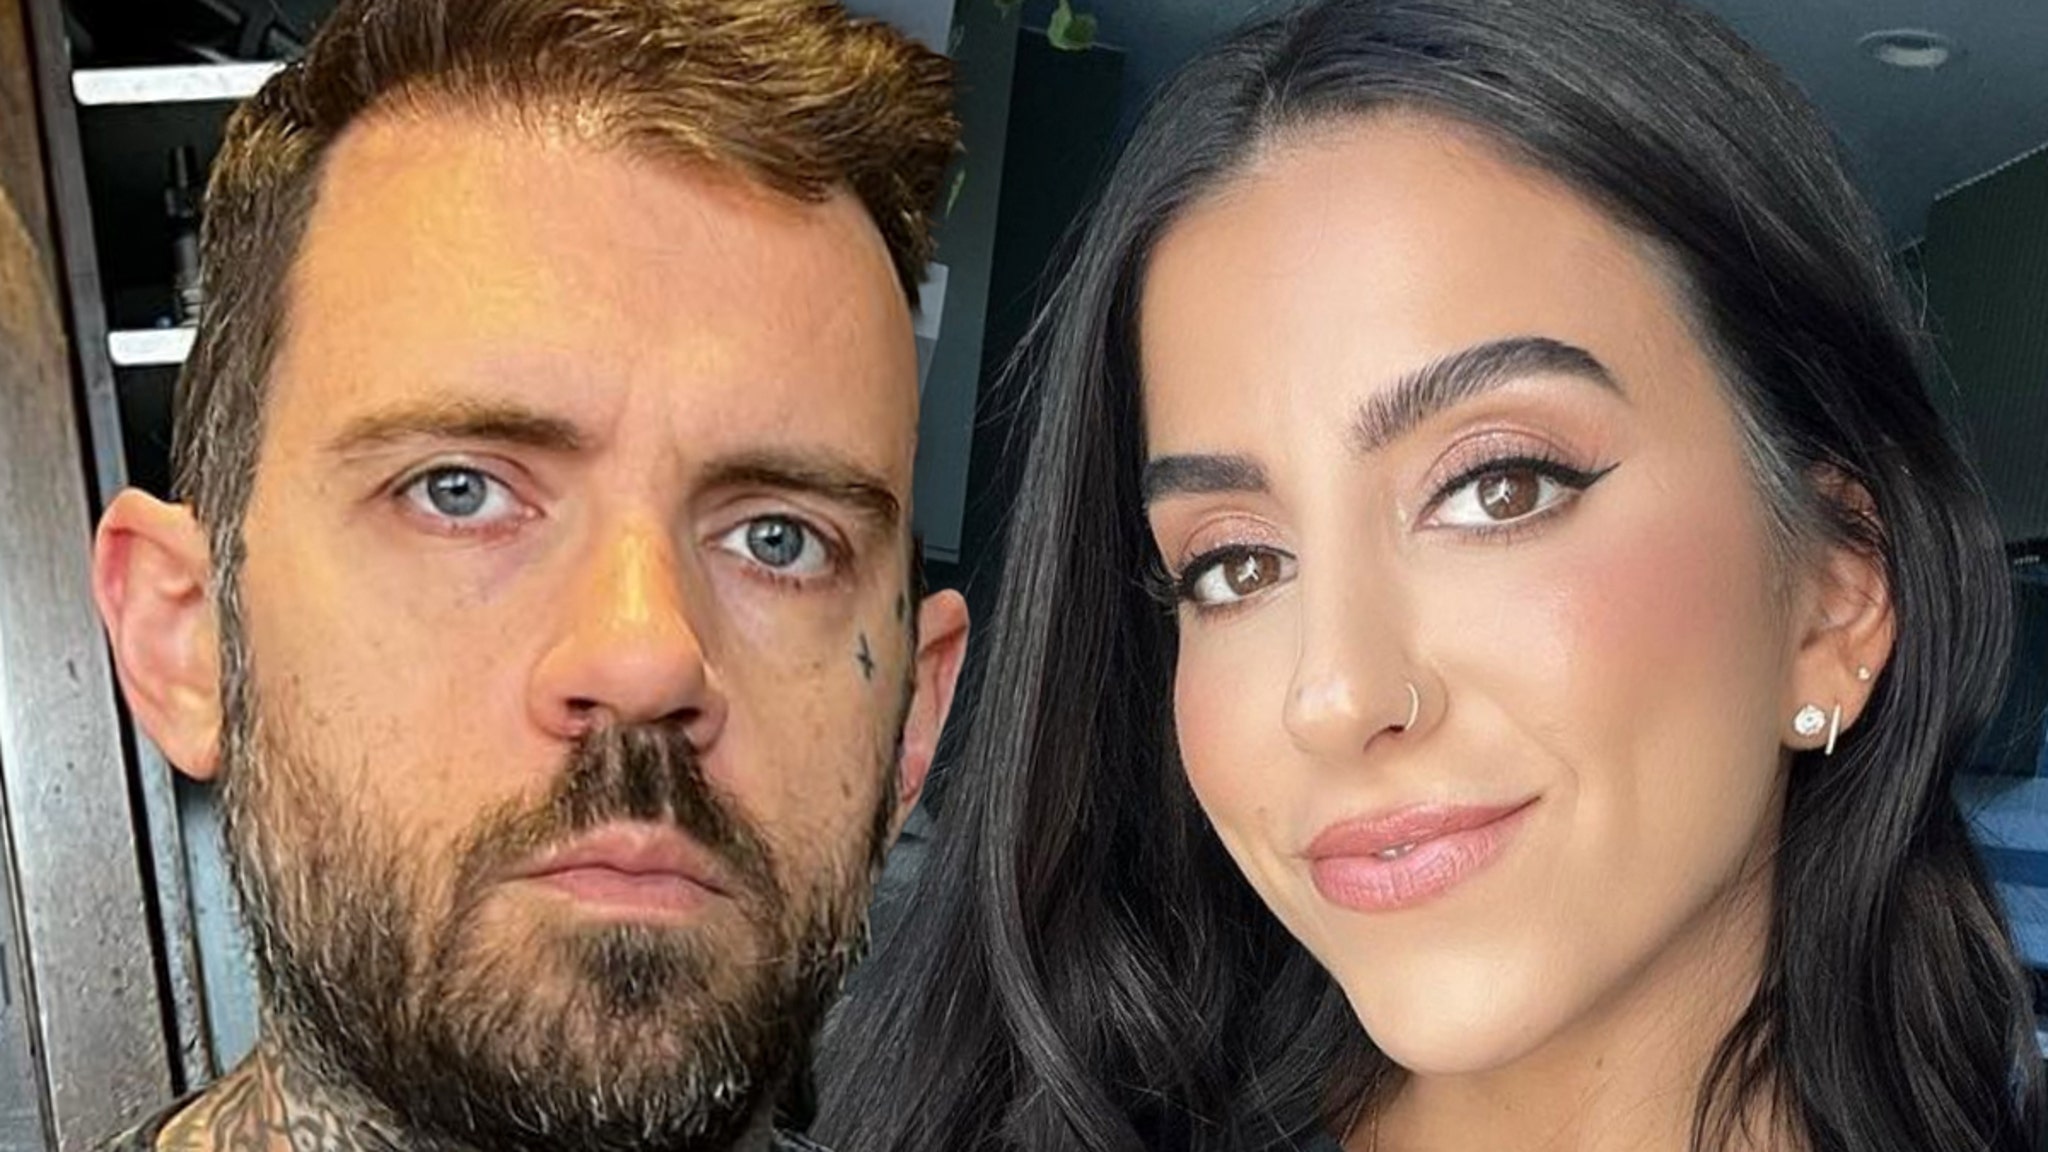 YouTuber Adam22 Fine With Wifes Porn Star Career After Getting Married